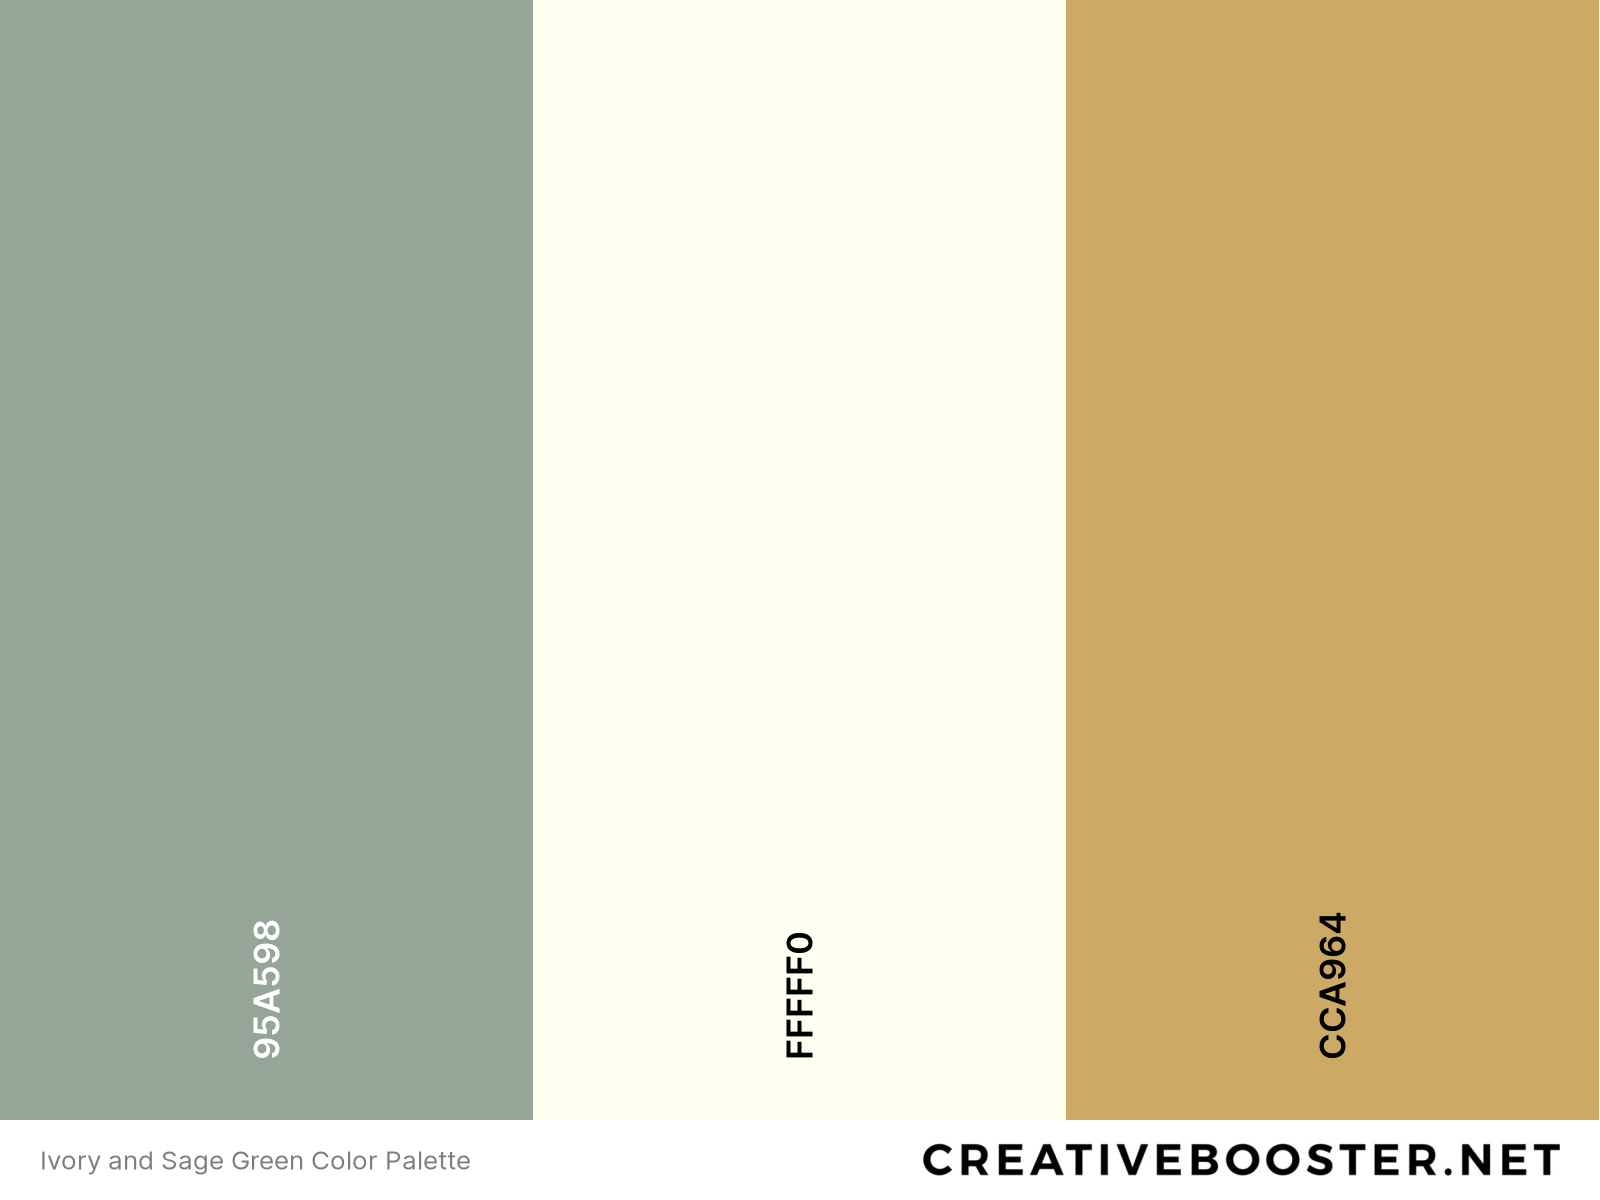 Ivory and Sage Green Color Palette